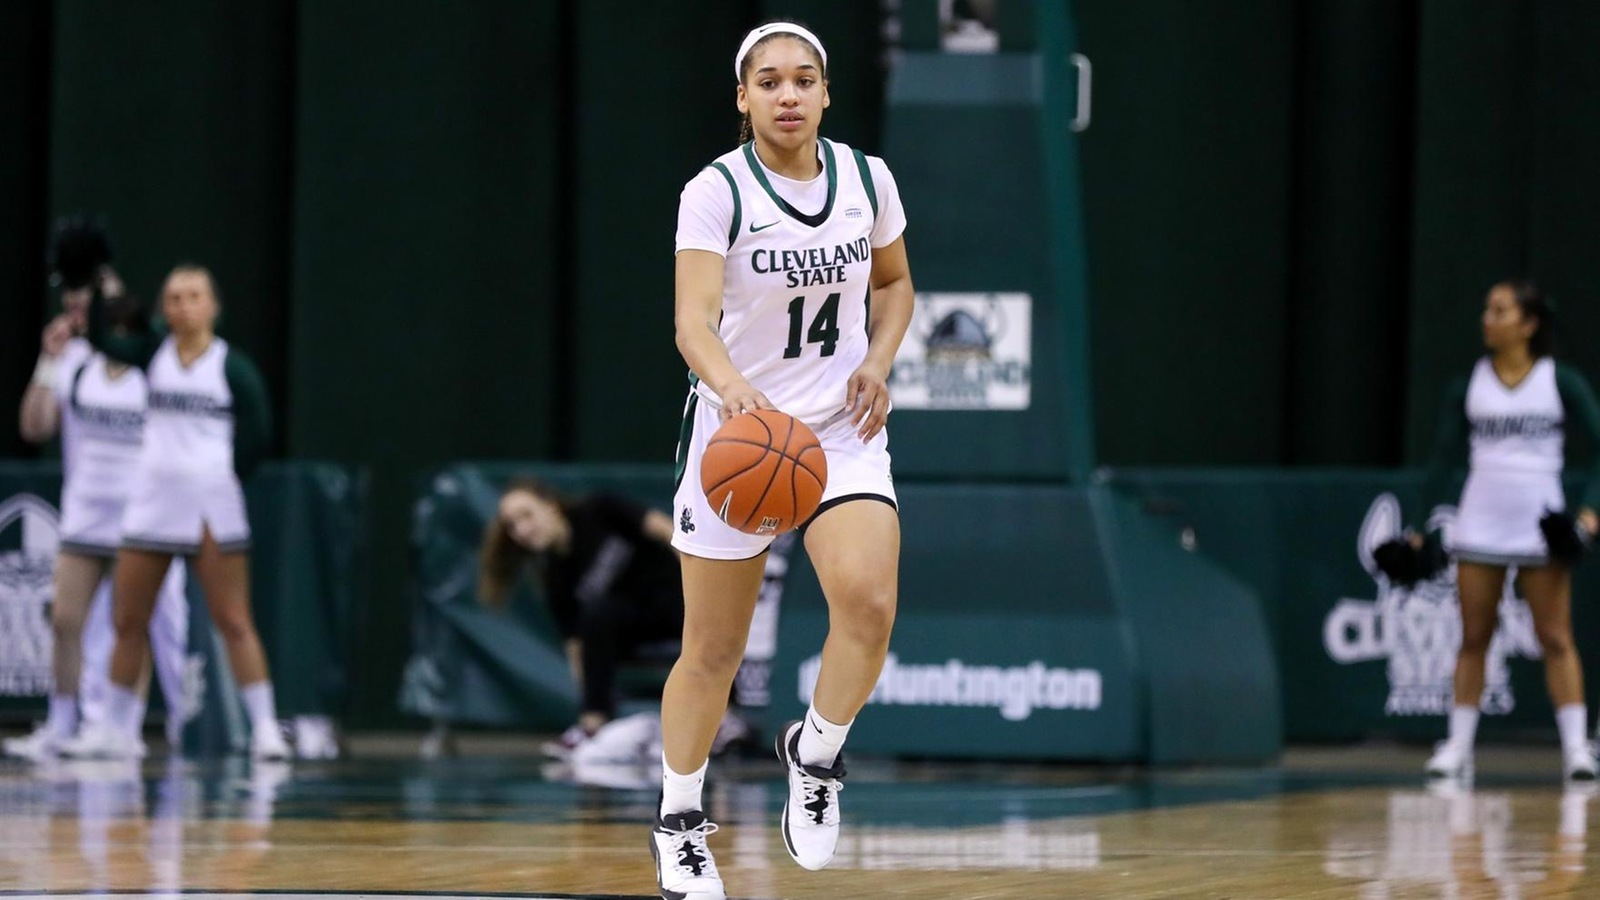 Women's Basketball Travels To IUPUI To Begin Second Half Of #HLWBB Slate